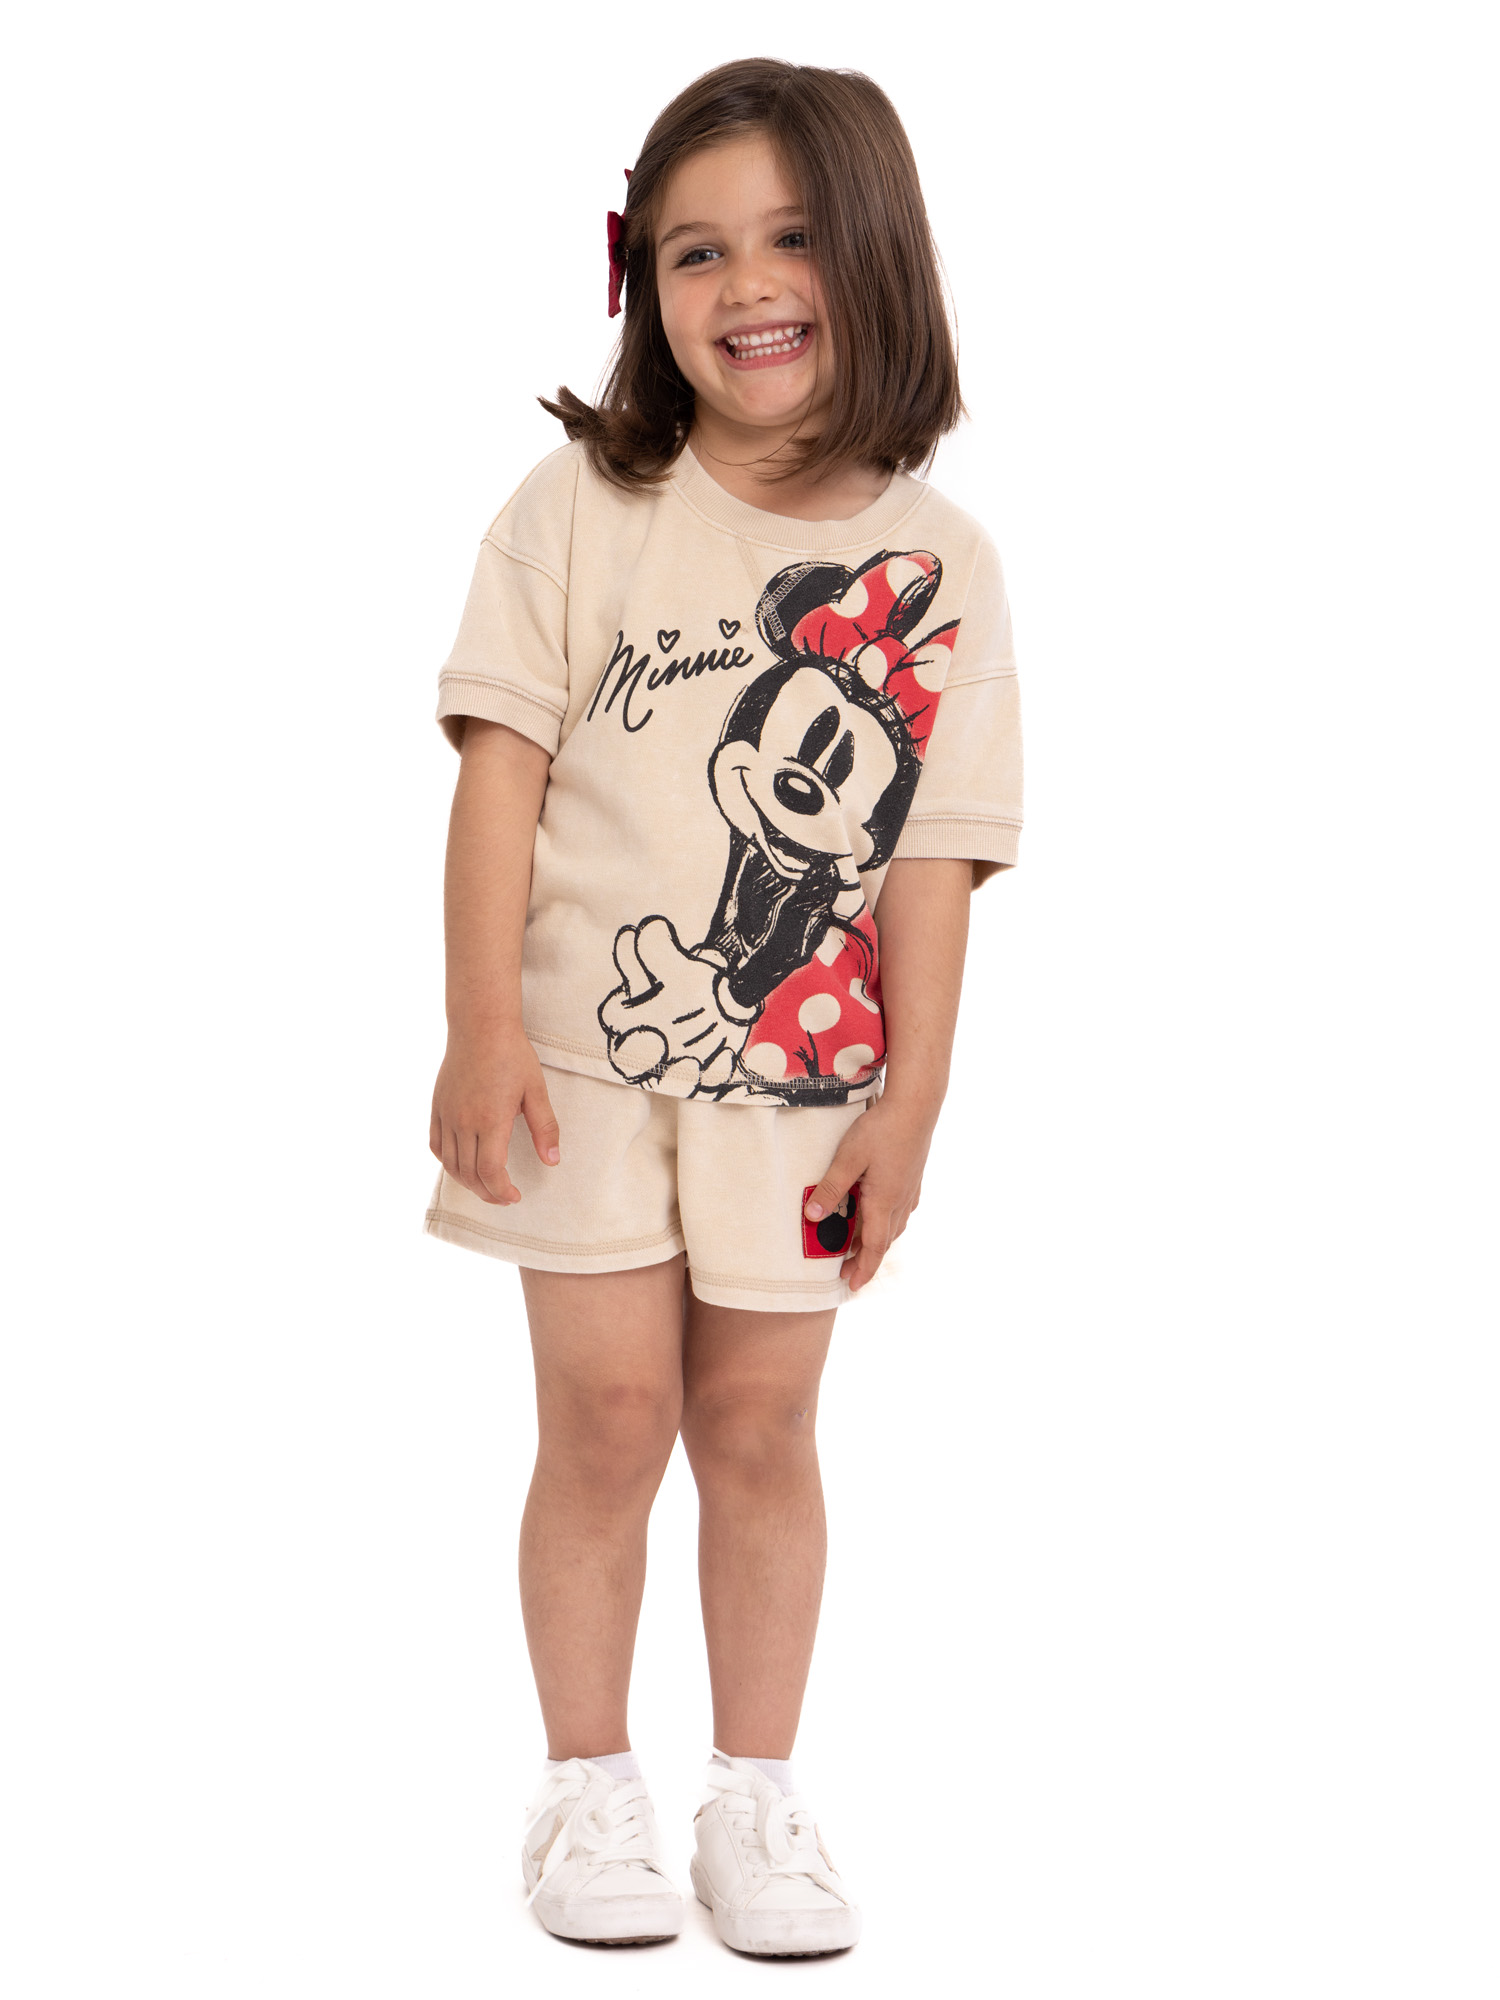 Minnie Mouse Toddler Girls Tee and Shorts Set, 2-Piece, Sizes 12M-5T - image 1 of 11